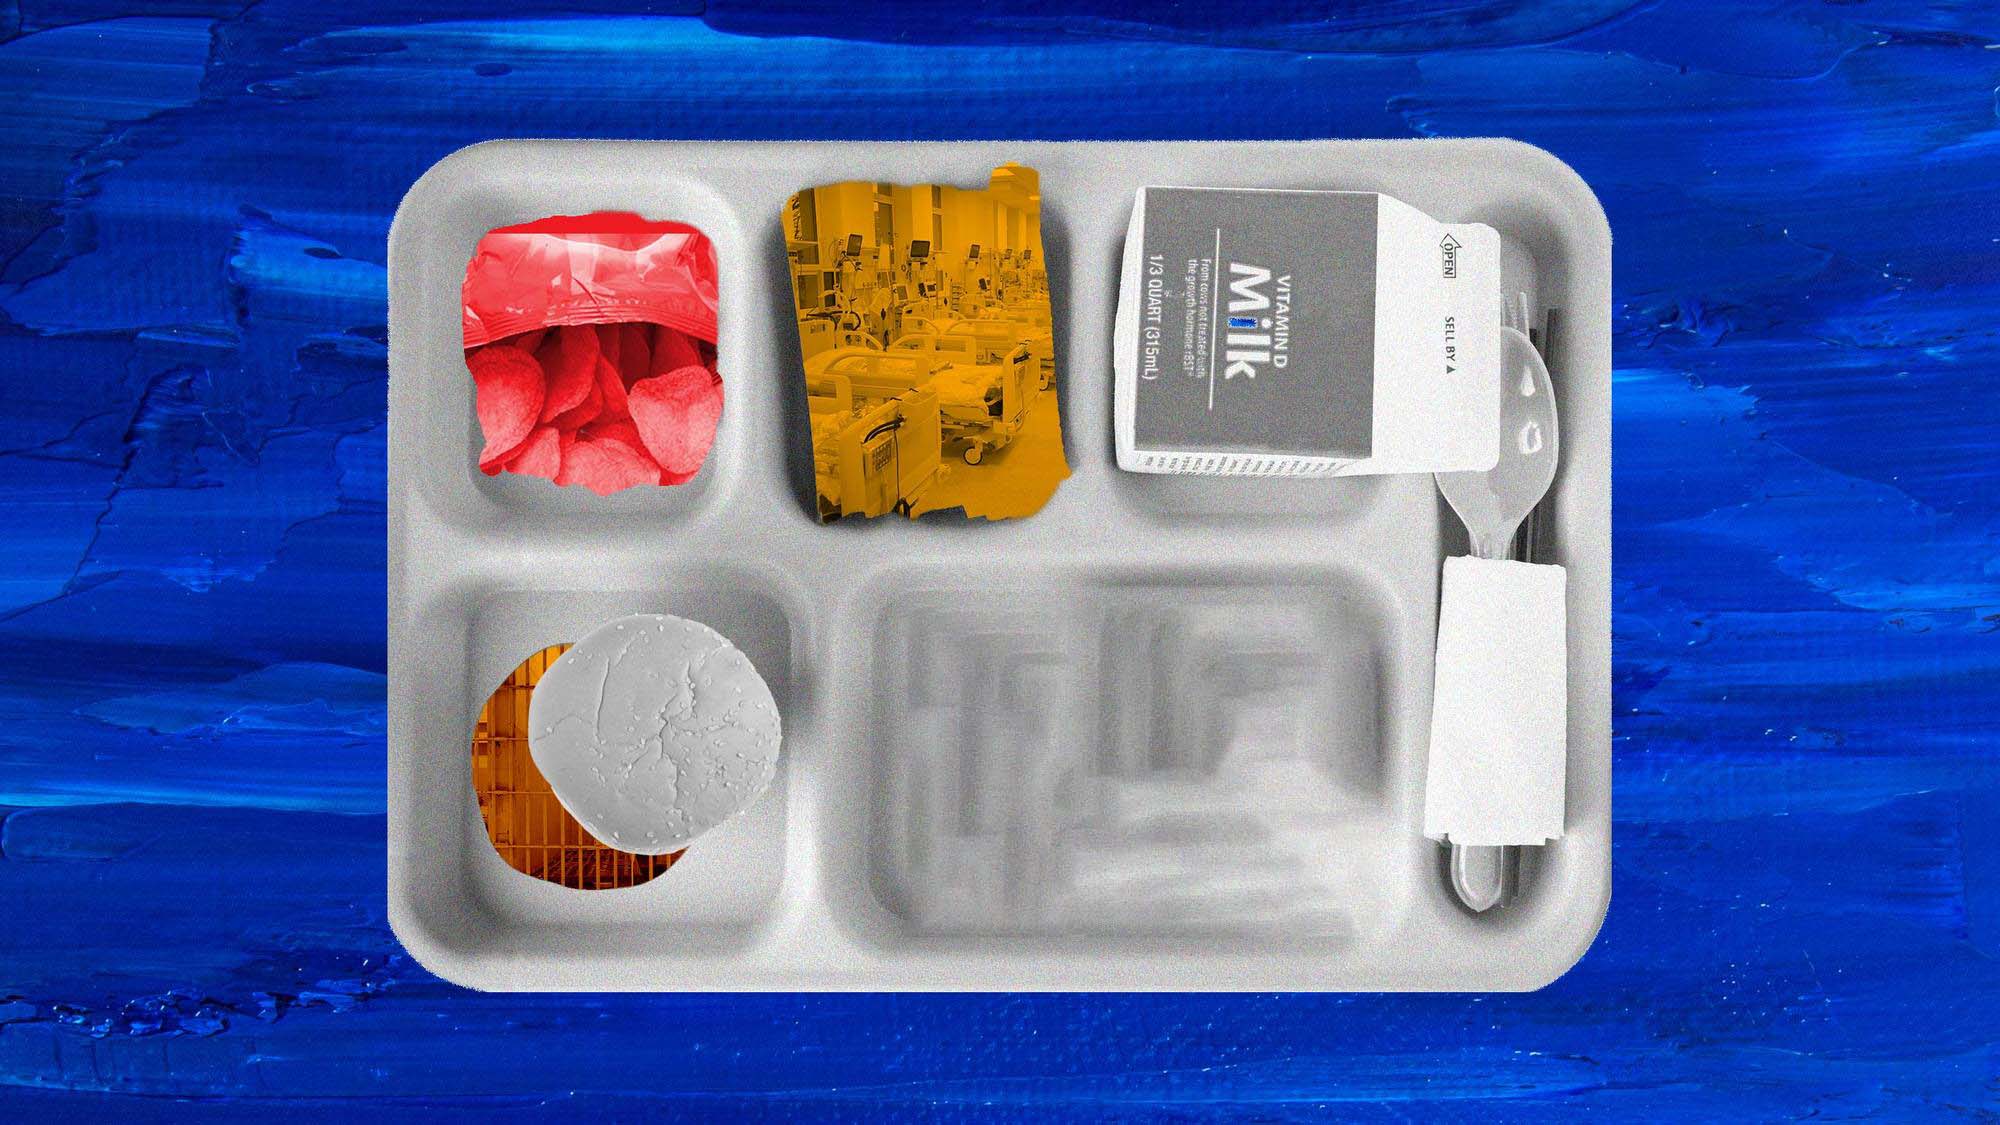 Gray tray with orange and red scenes of chips, hospital, and prison bars on blue painted background January 2022 social.